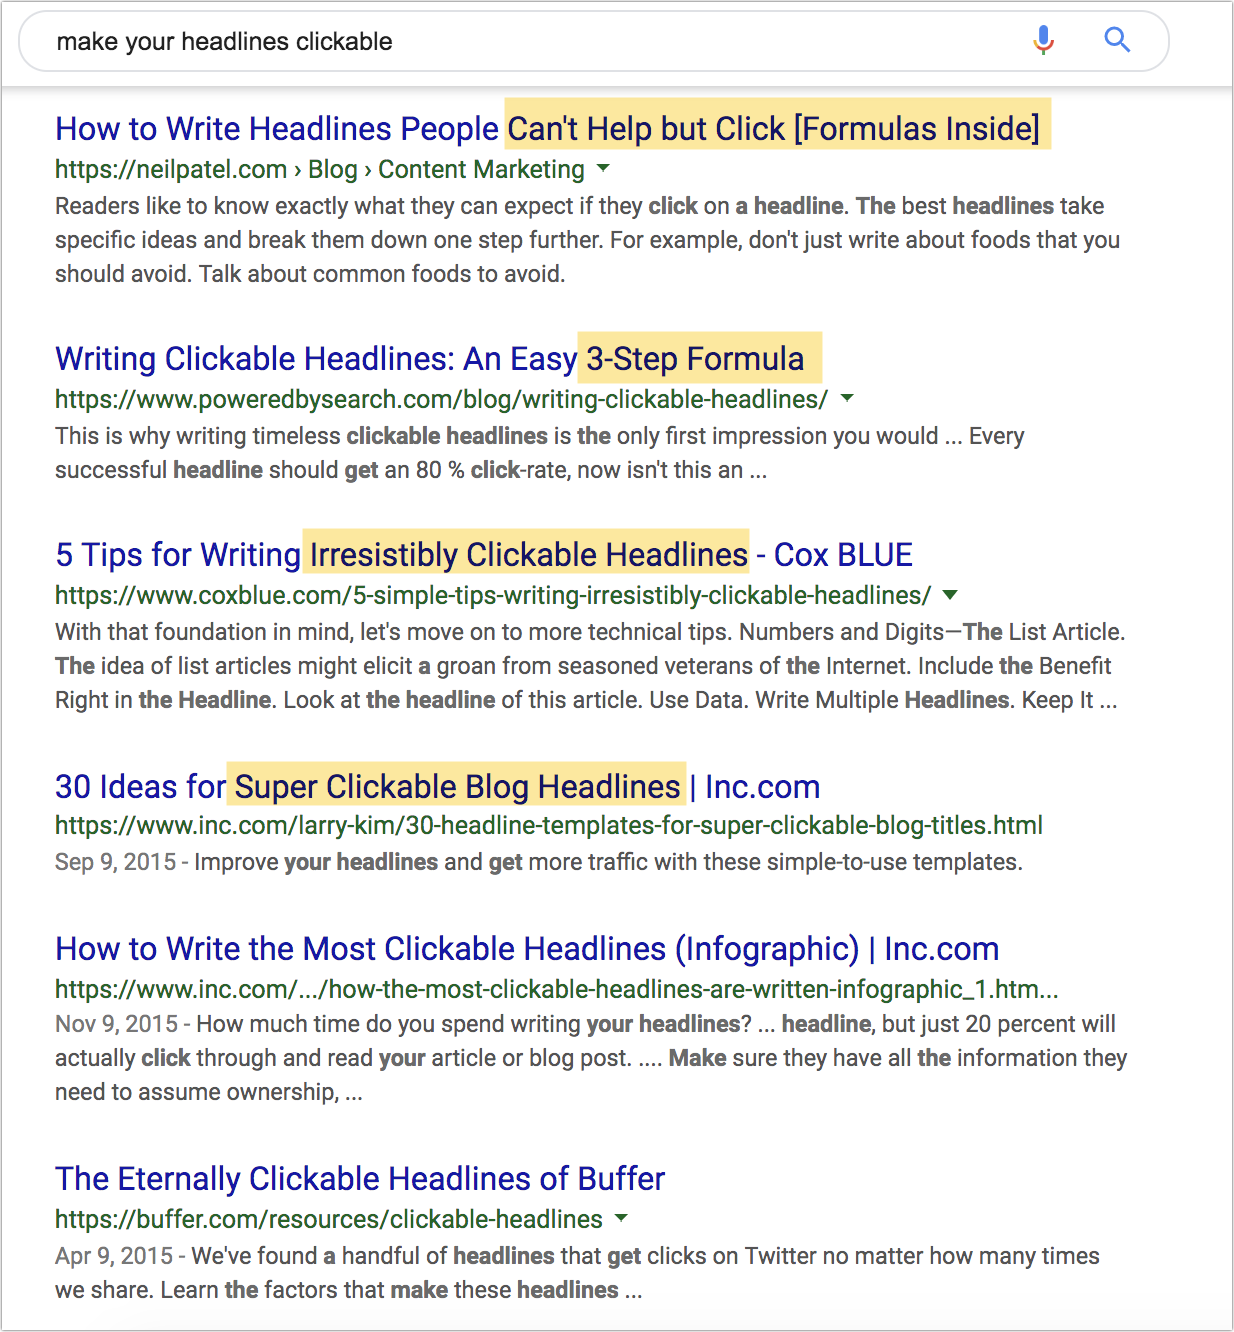 example of headlines in google search results.